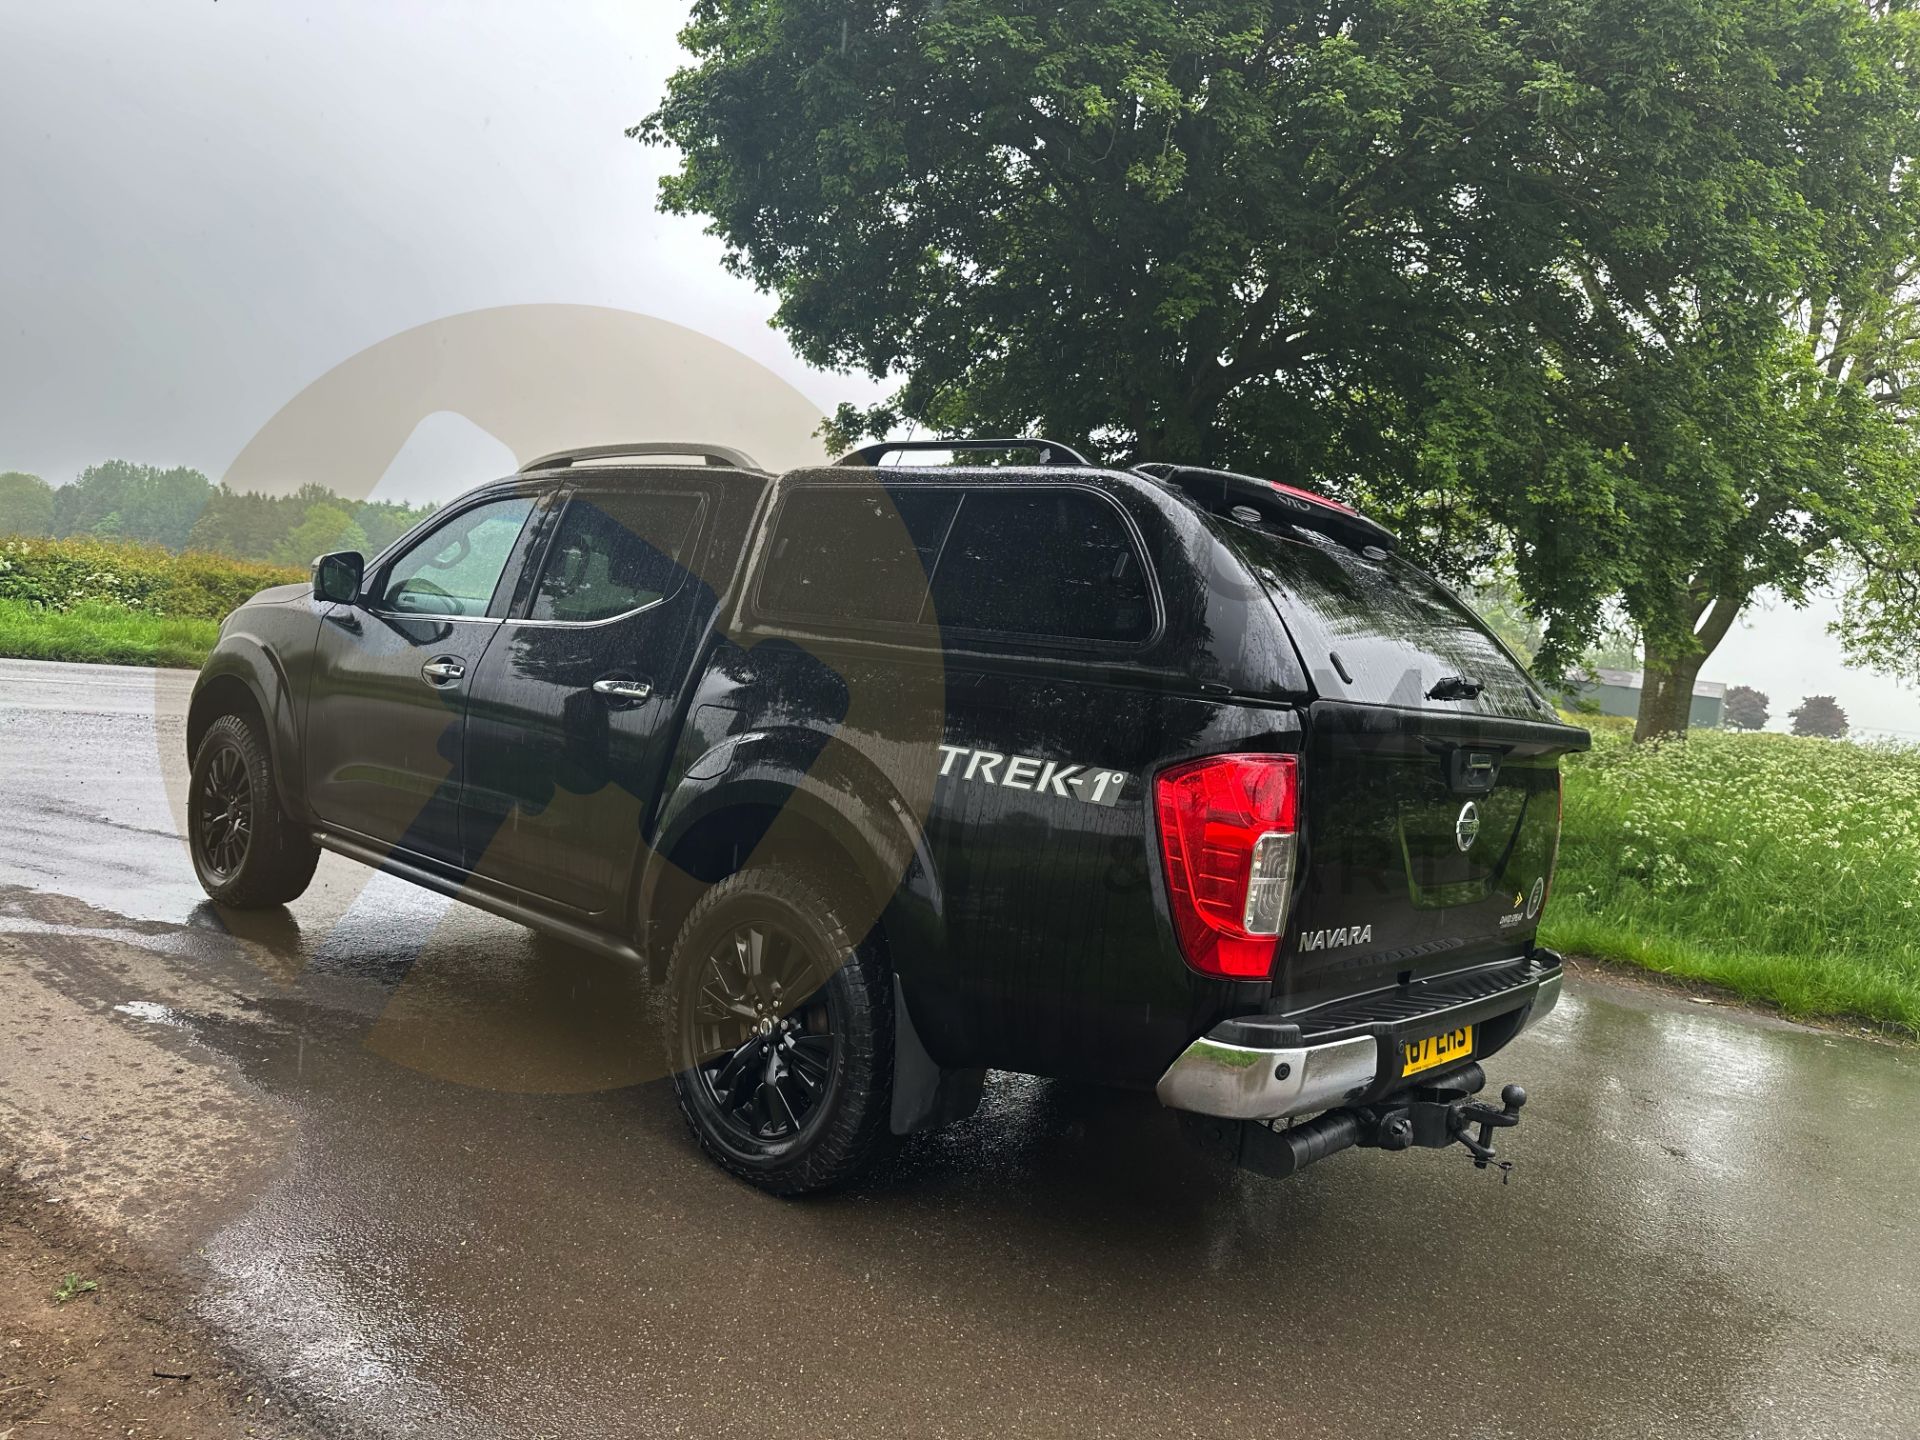 (ON SALE) NISSAN NAVARA *TREK-1 EDITION* DOUBLE CAB PICK-UP (2018 - EURO 6) 2.3 DCI - AUTOMATIC - Image 10 of 52